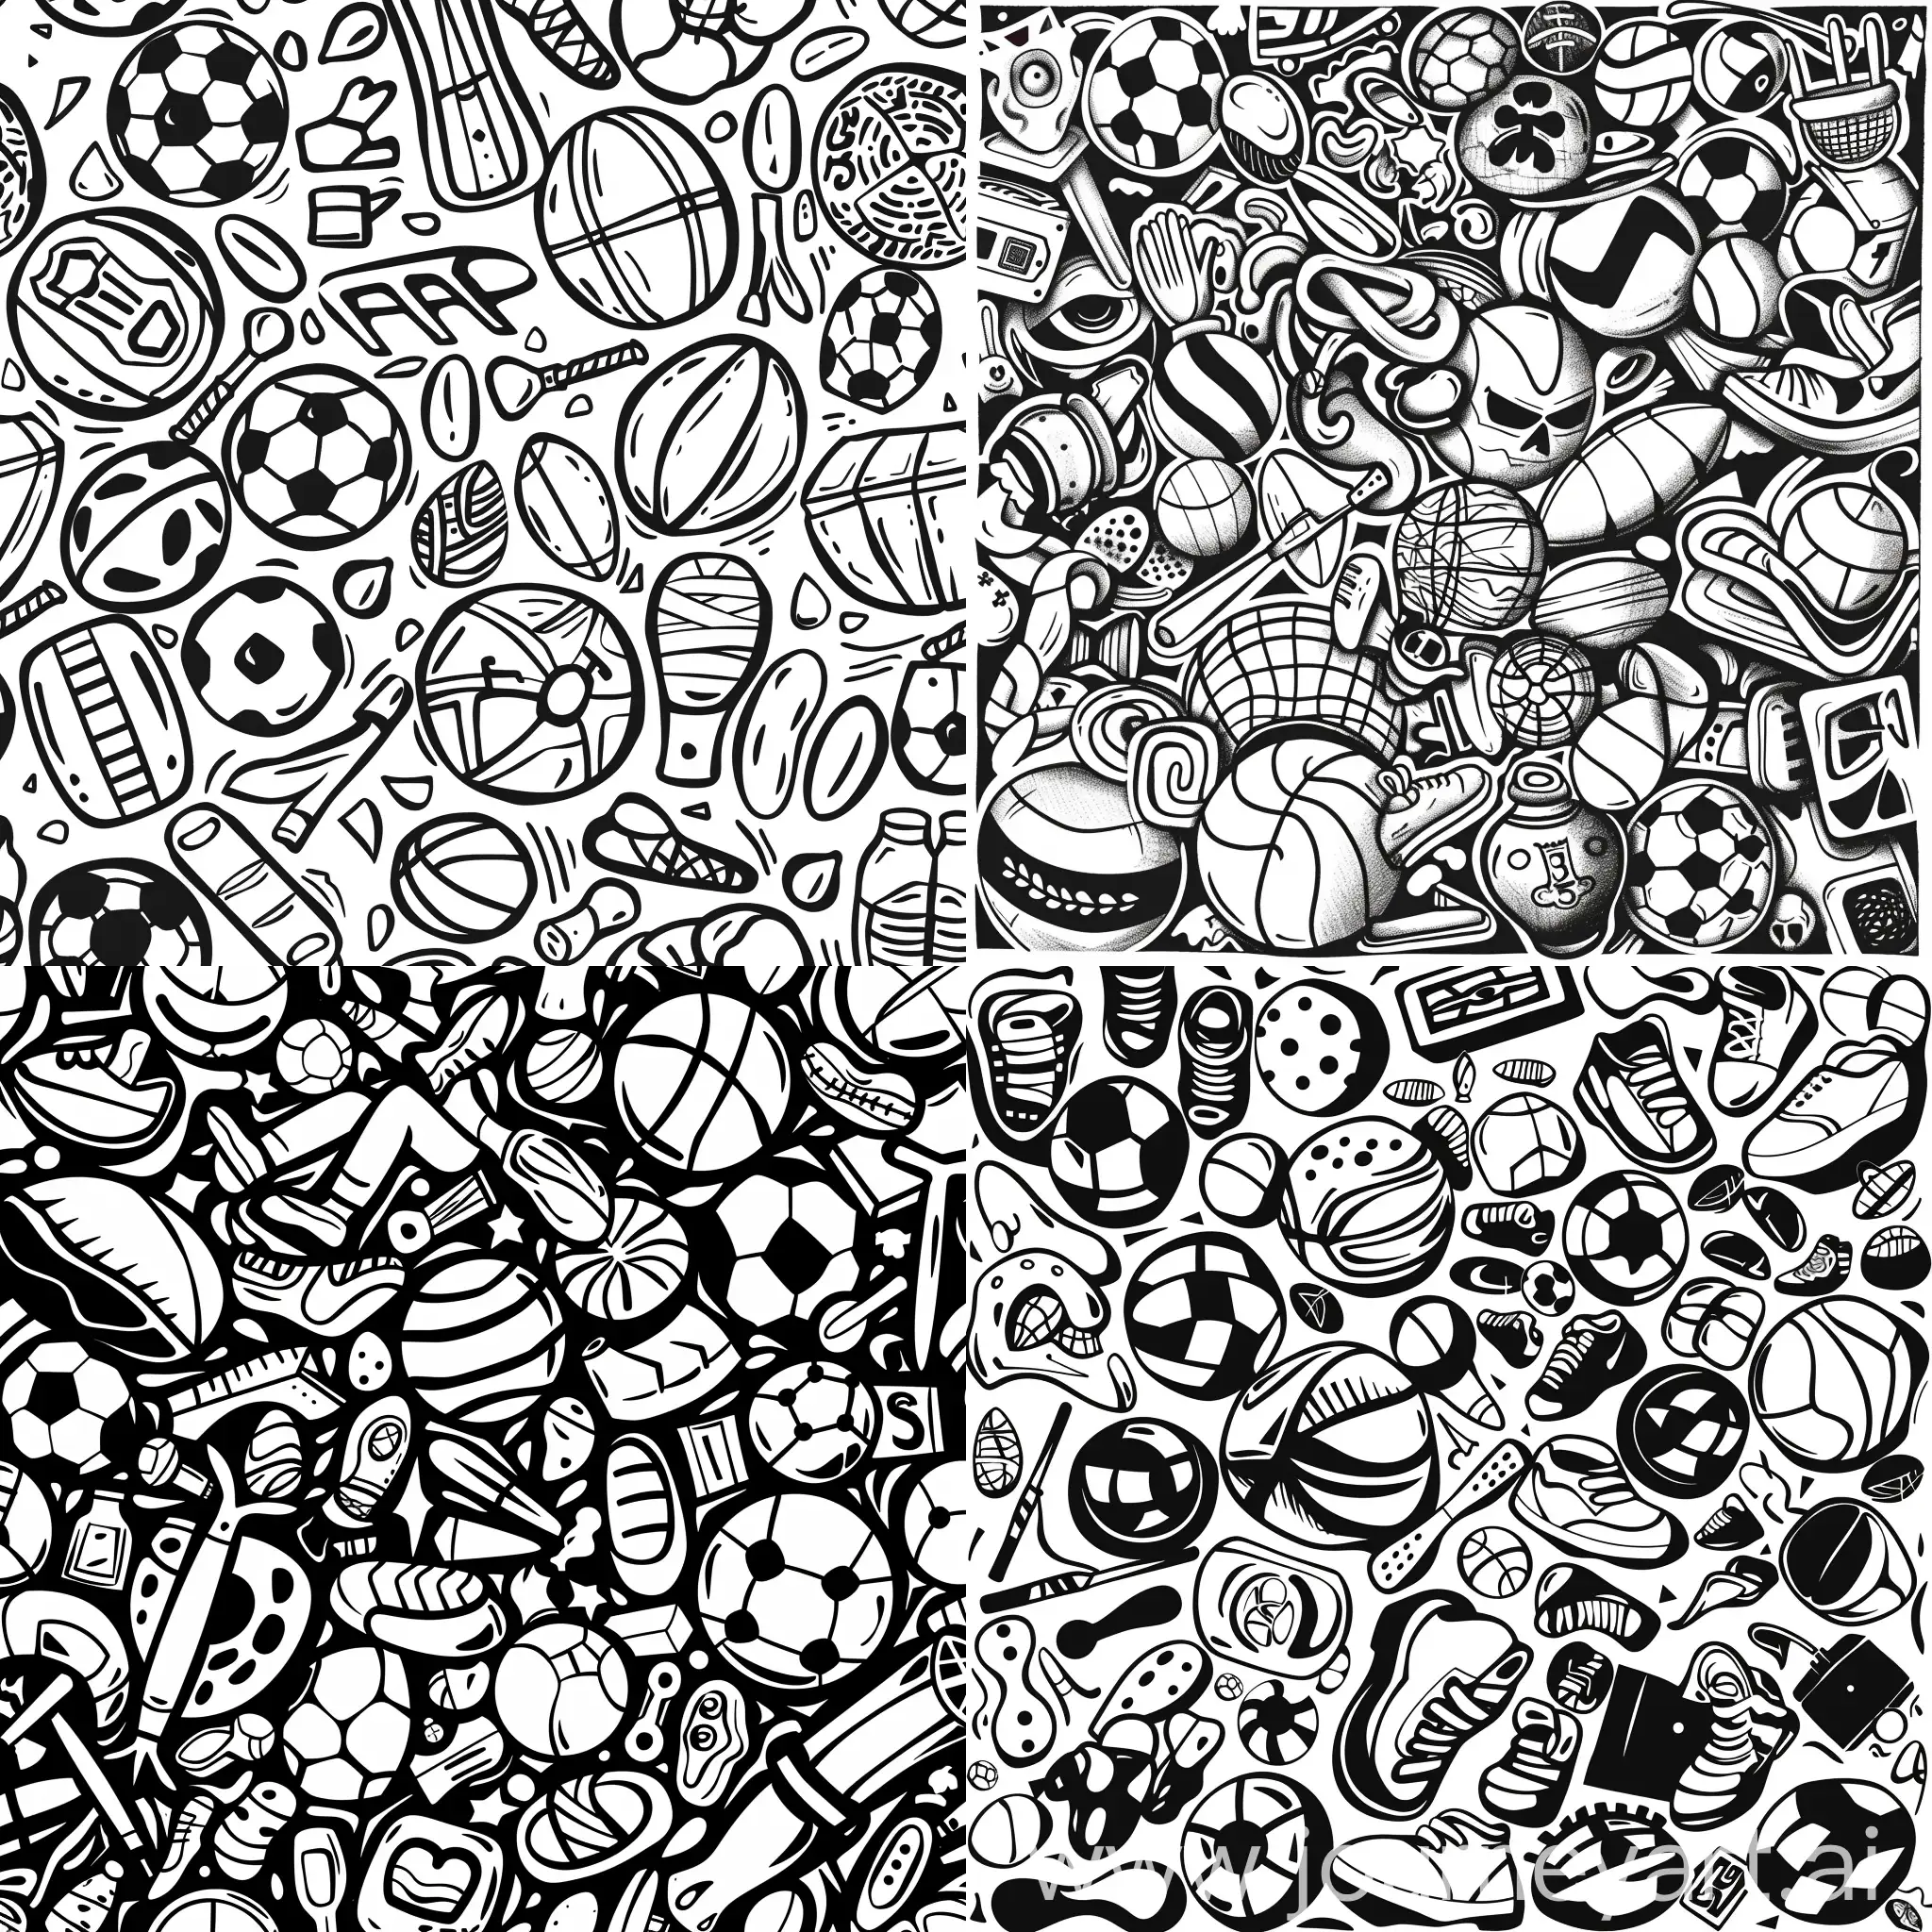 Multiple-Pattern-Sports-Doodle-in-White-Solid-Background